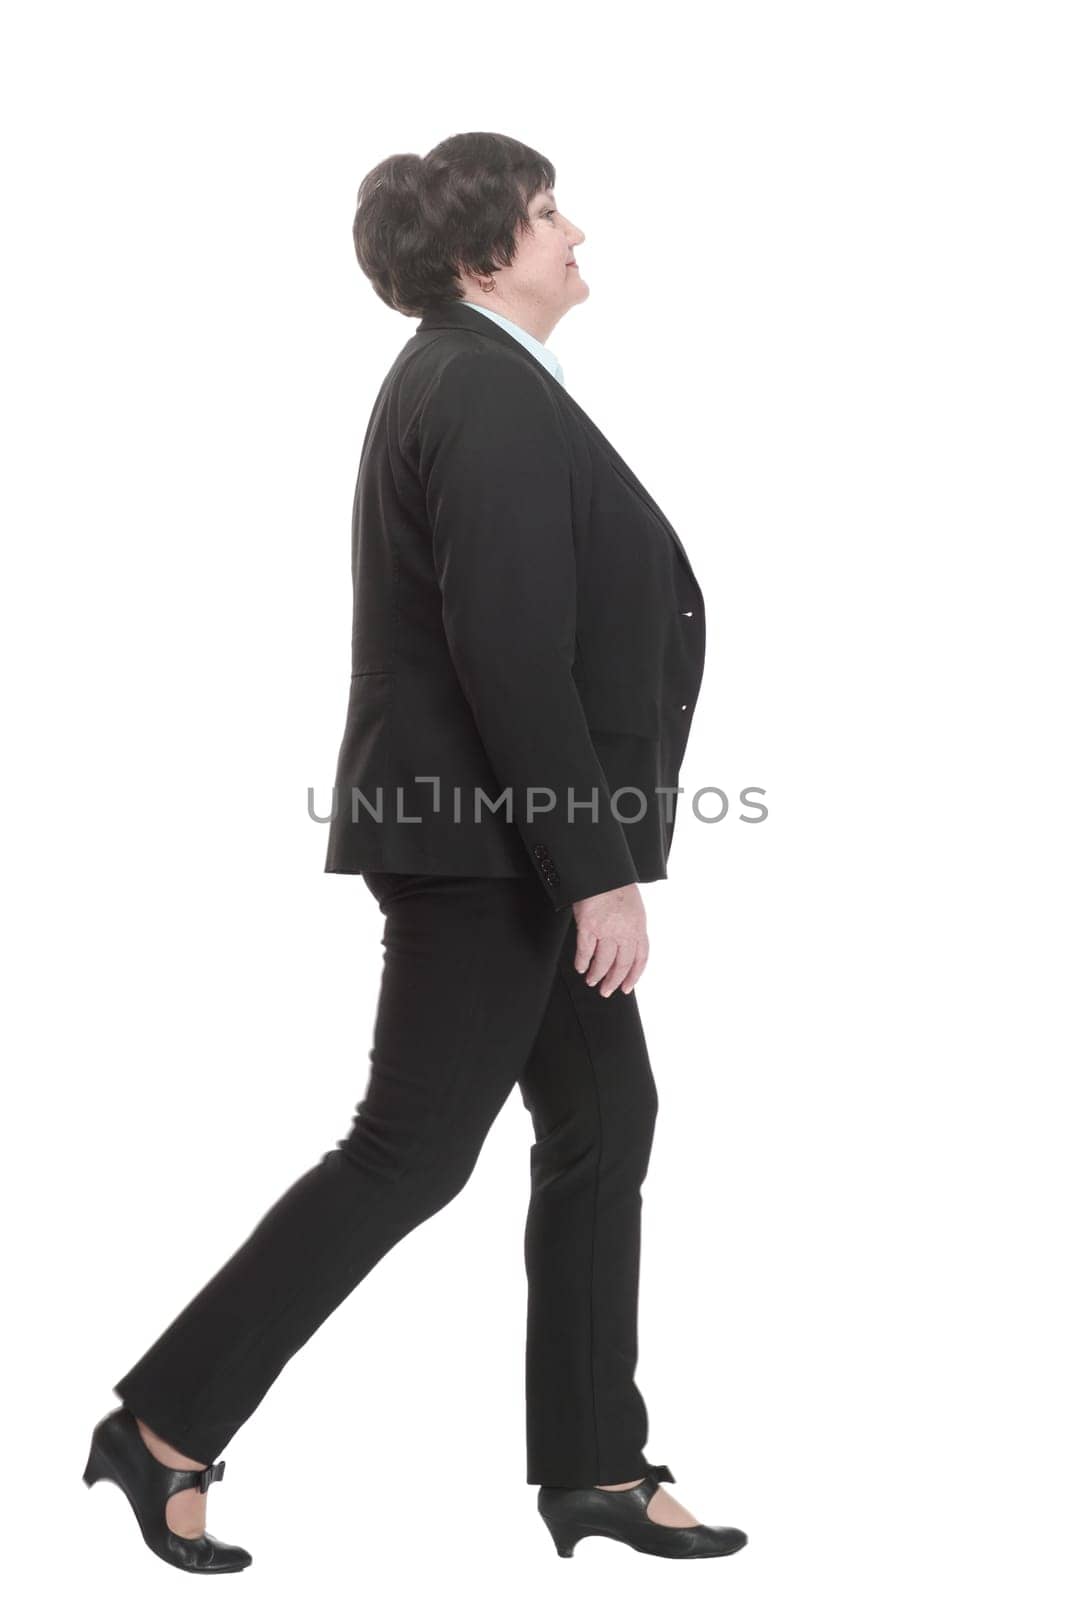 Mature business woman in a pantsuit striding forward. by asdf